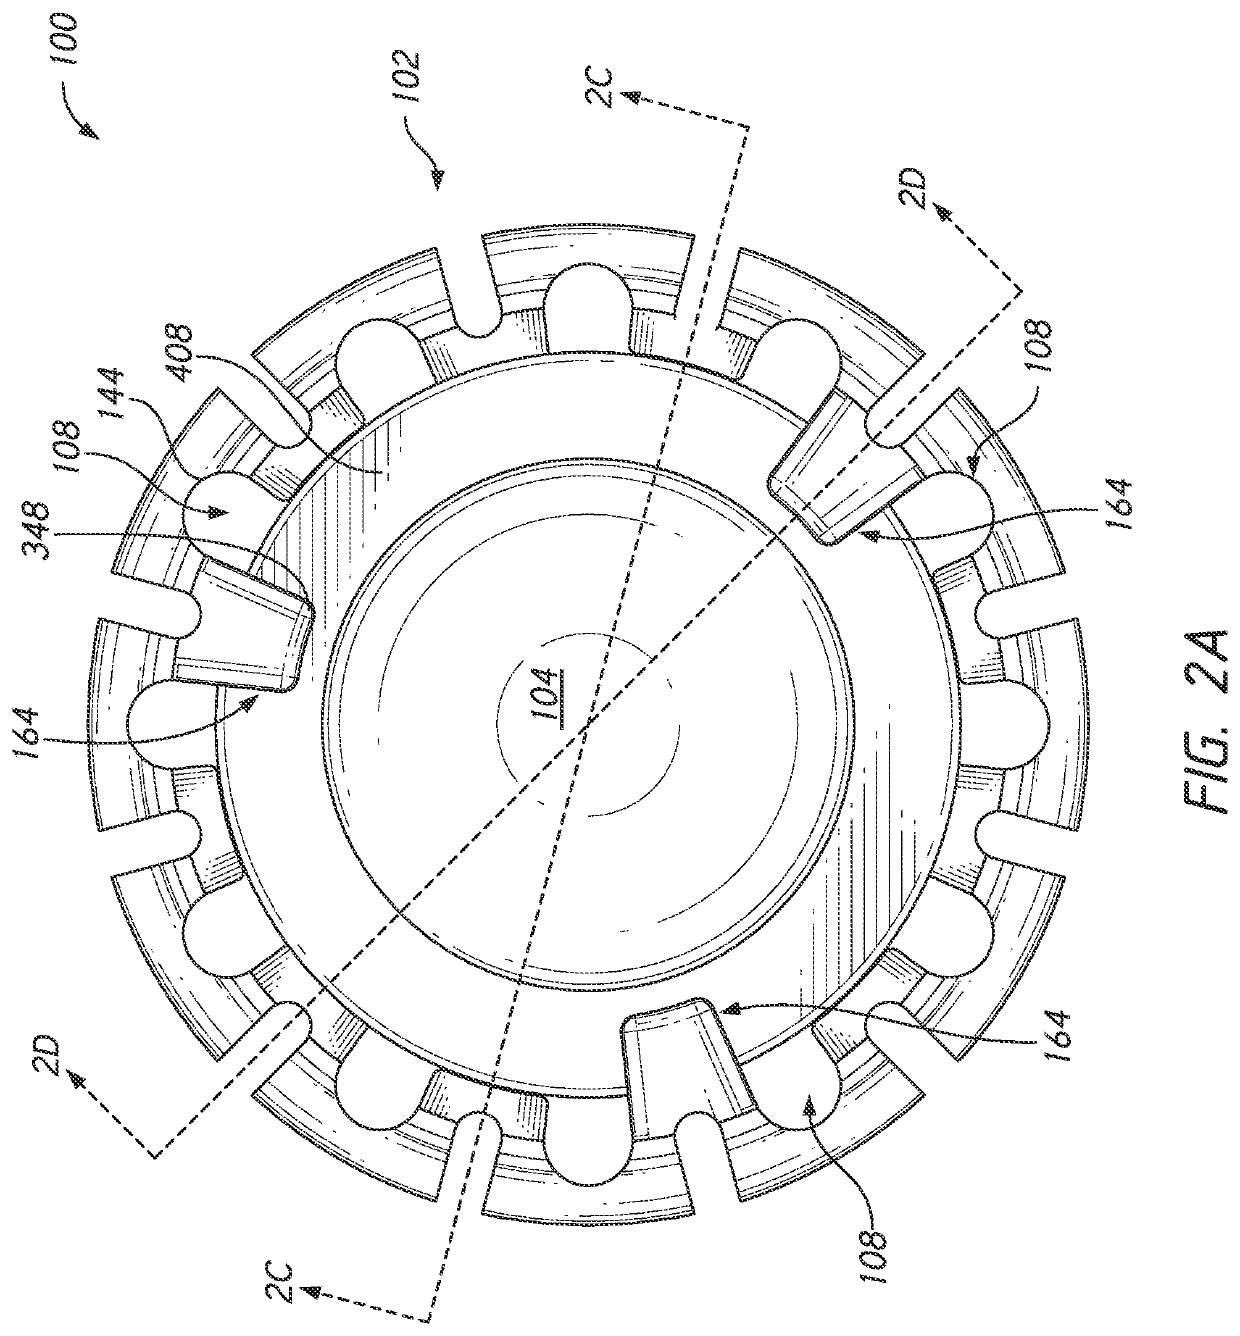 Intraocular lens device and related methods